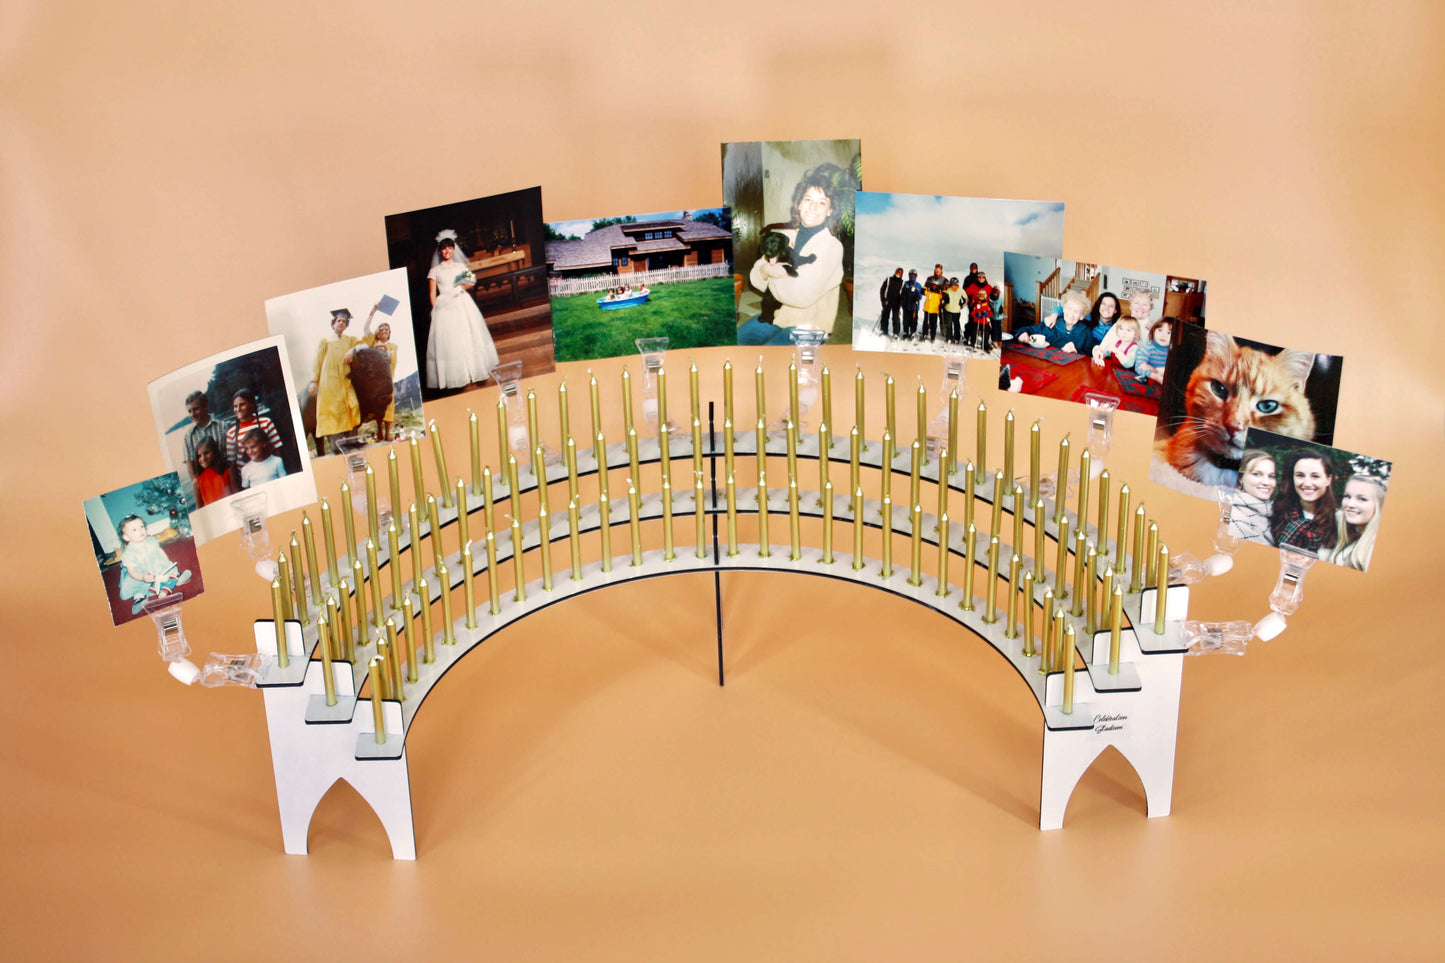 Birthday Party Decorations Using Stadium Clips on the Candle Holder, Featuring Photos Of Birthday Person's Life